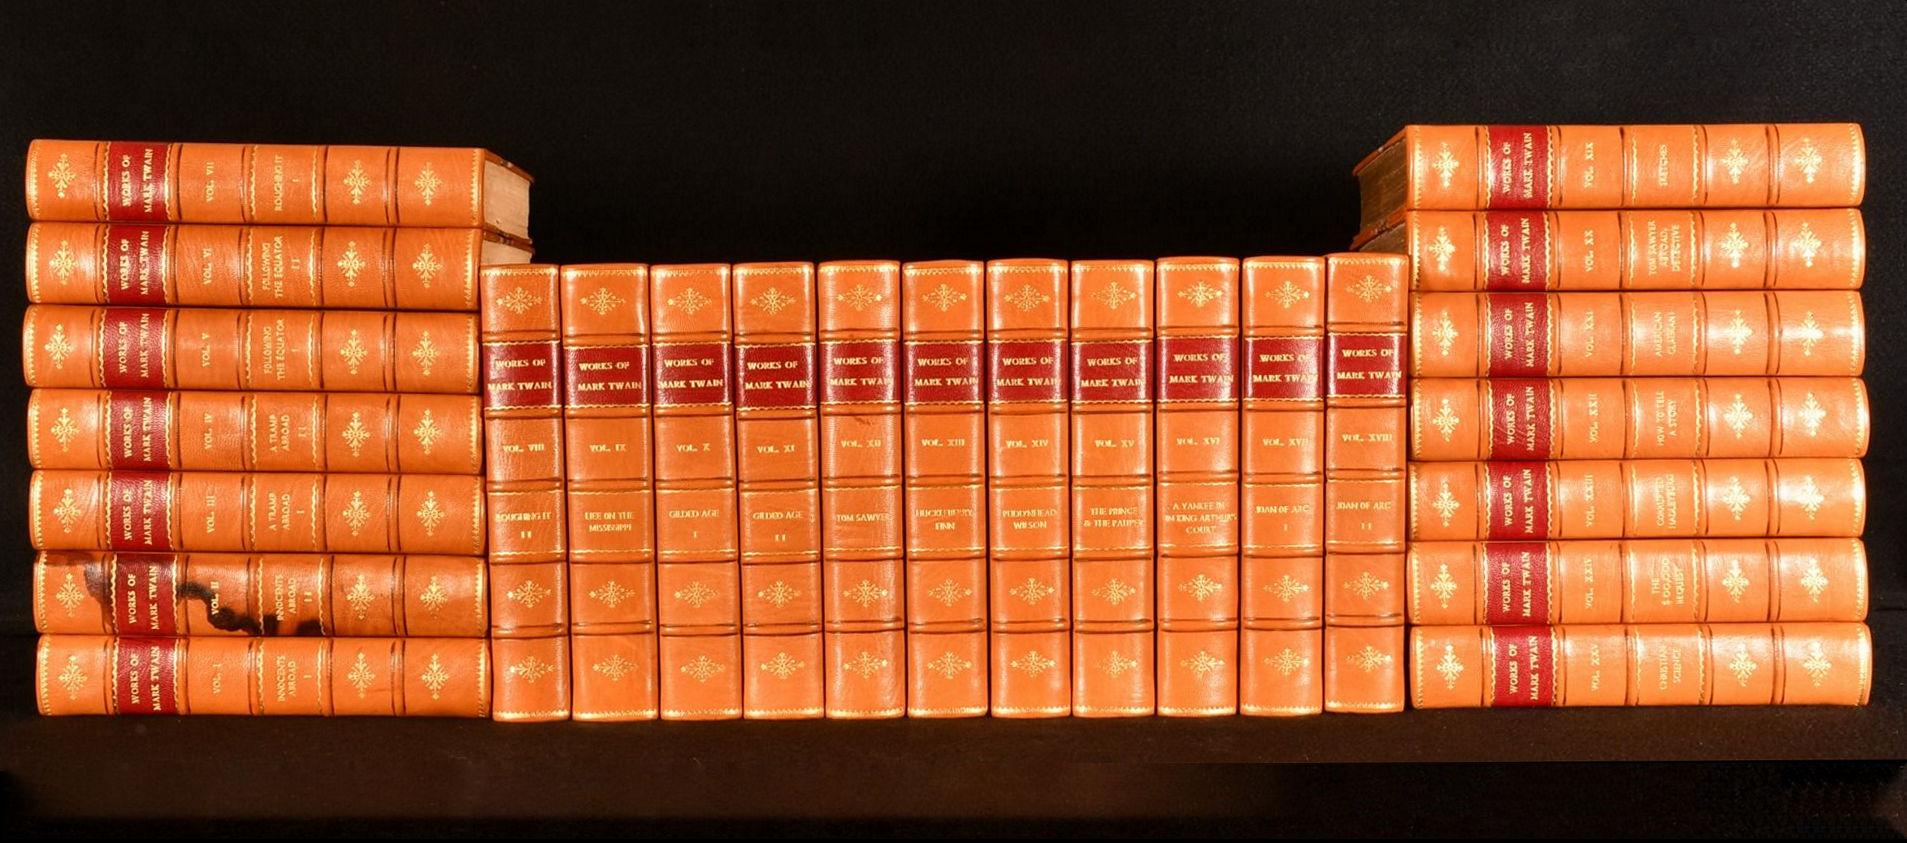 A striking set of the works of the great American author Mark Twain, a smartly bound set including all of his best known and influential works.

The collected works of Mark Twain.

Complete in twenty-five volumes.

This Hillcrest edition is named